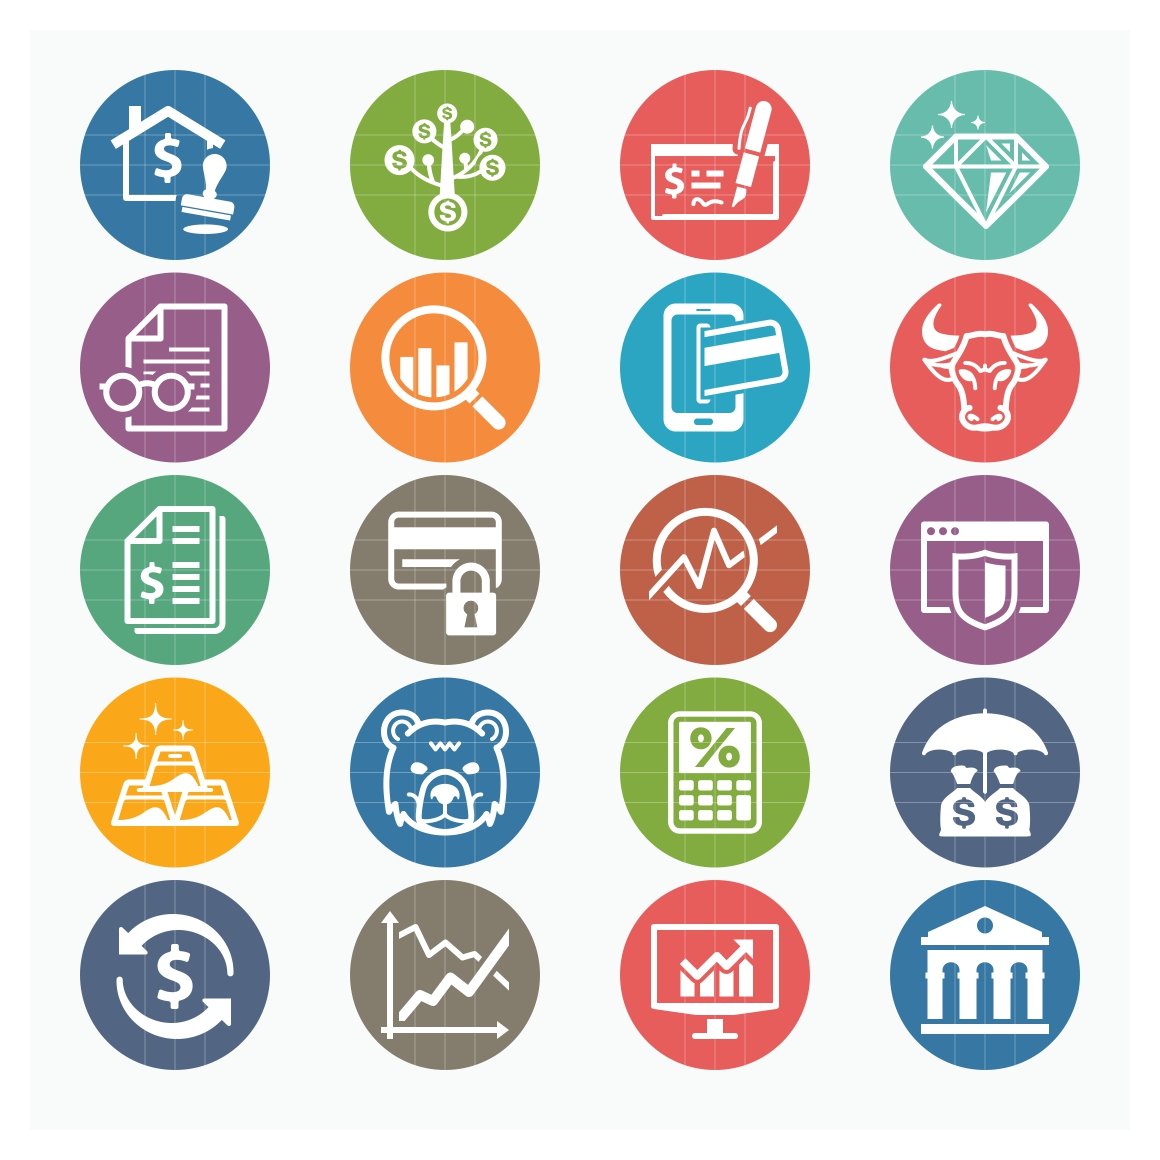 personal business finance icons set 1 dot series 781